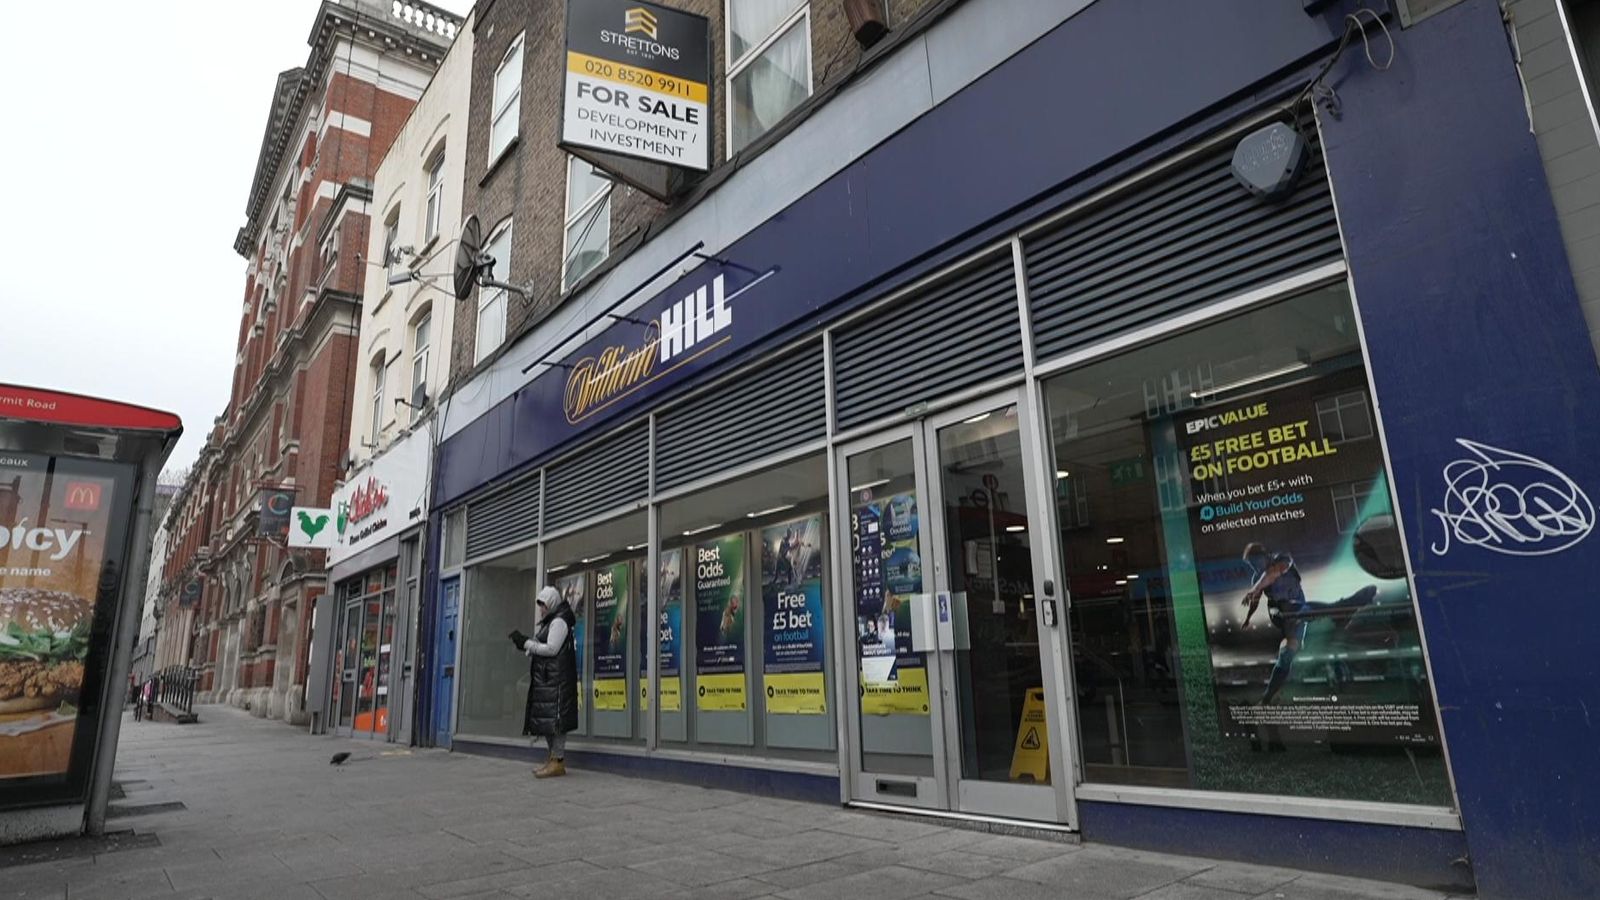 William Hill owner 888 expects no further impact from record gambling fine